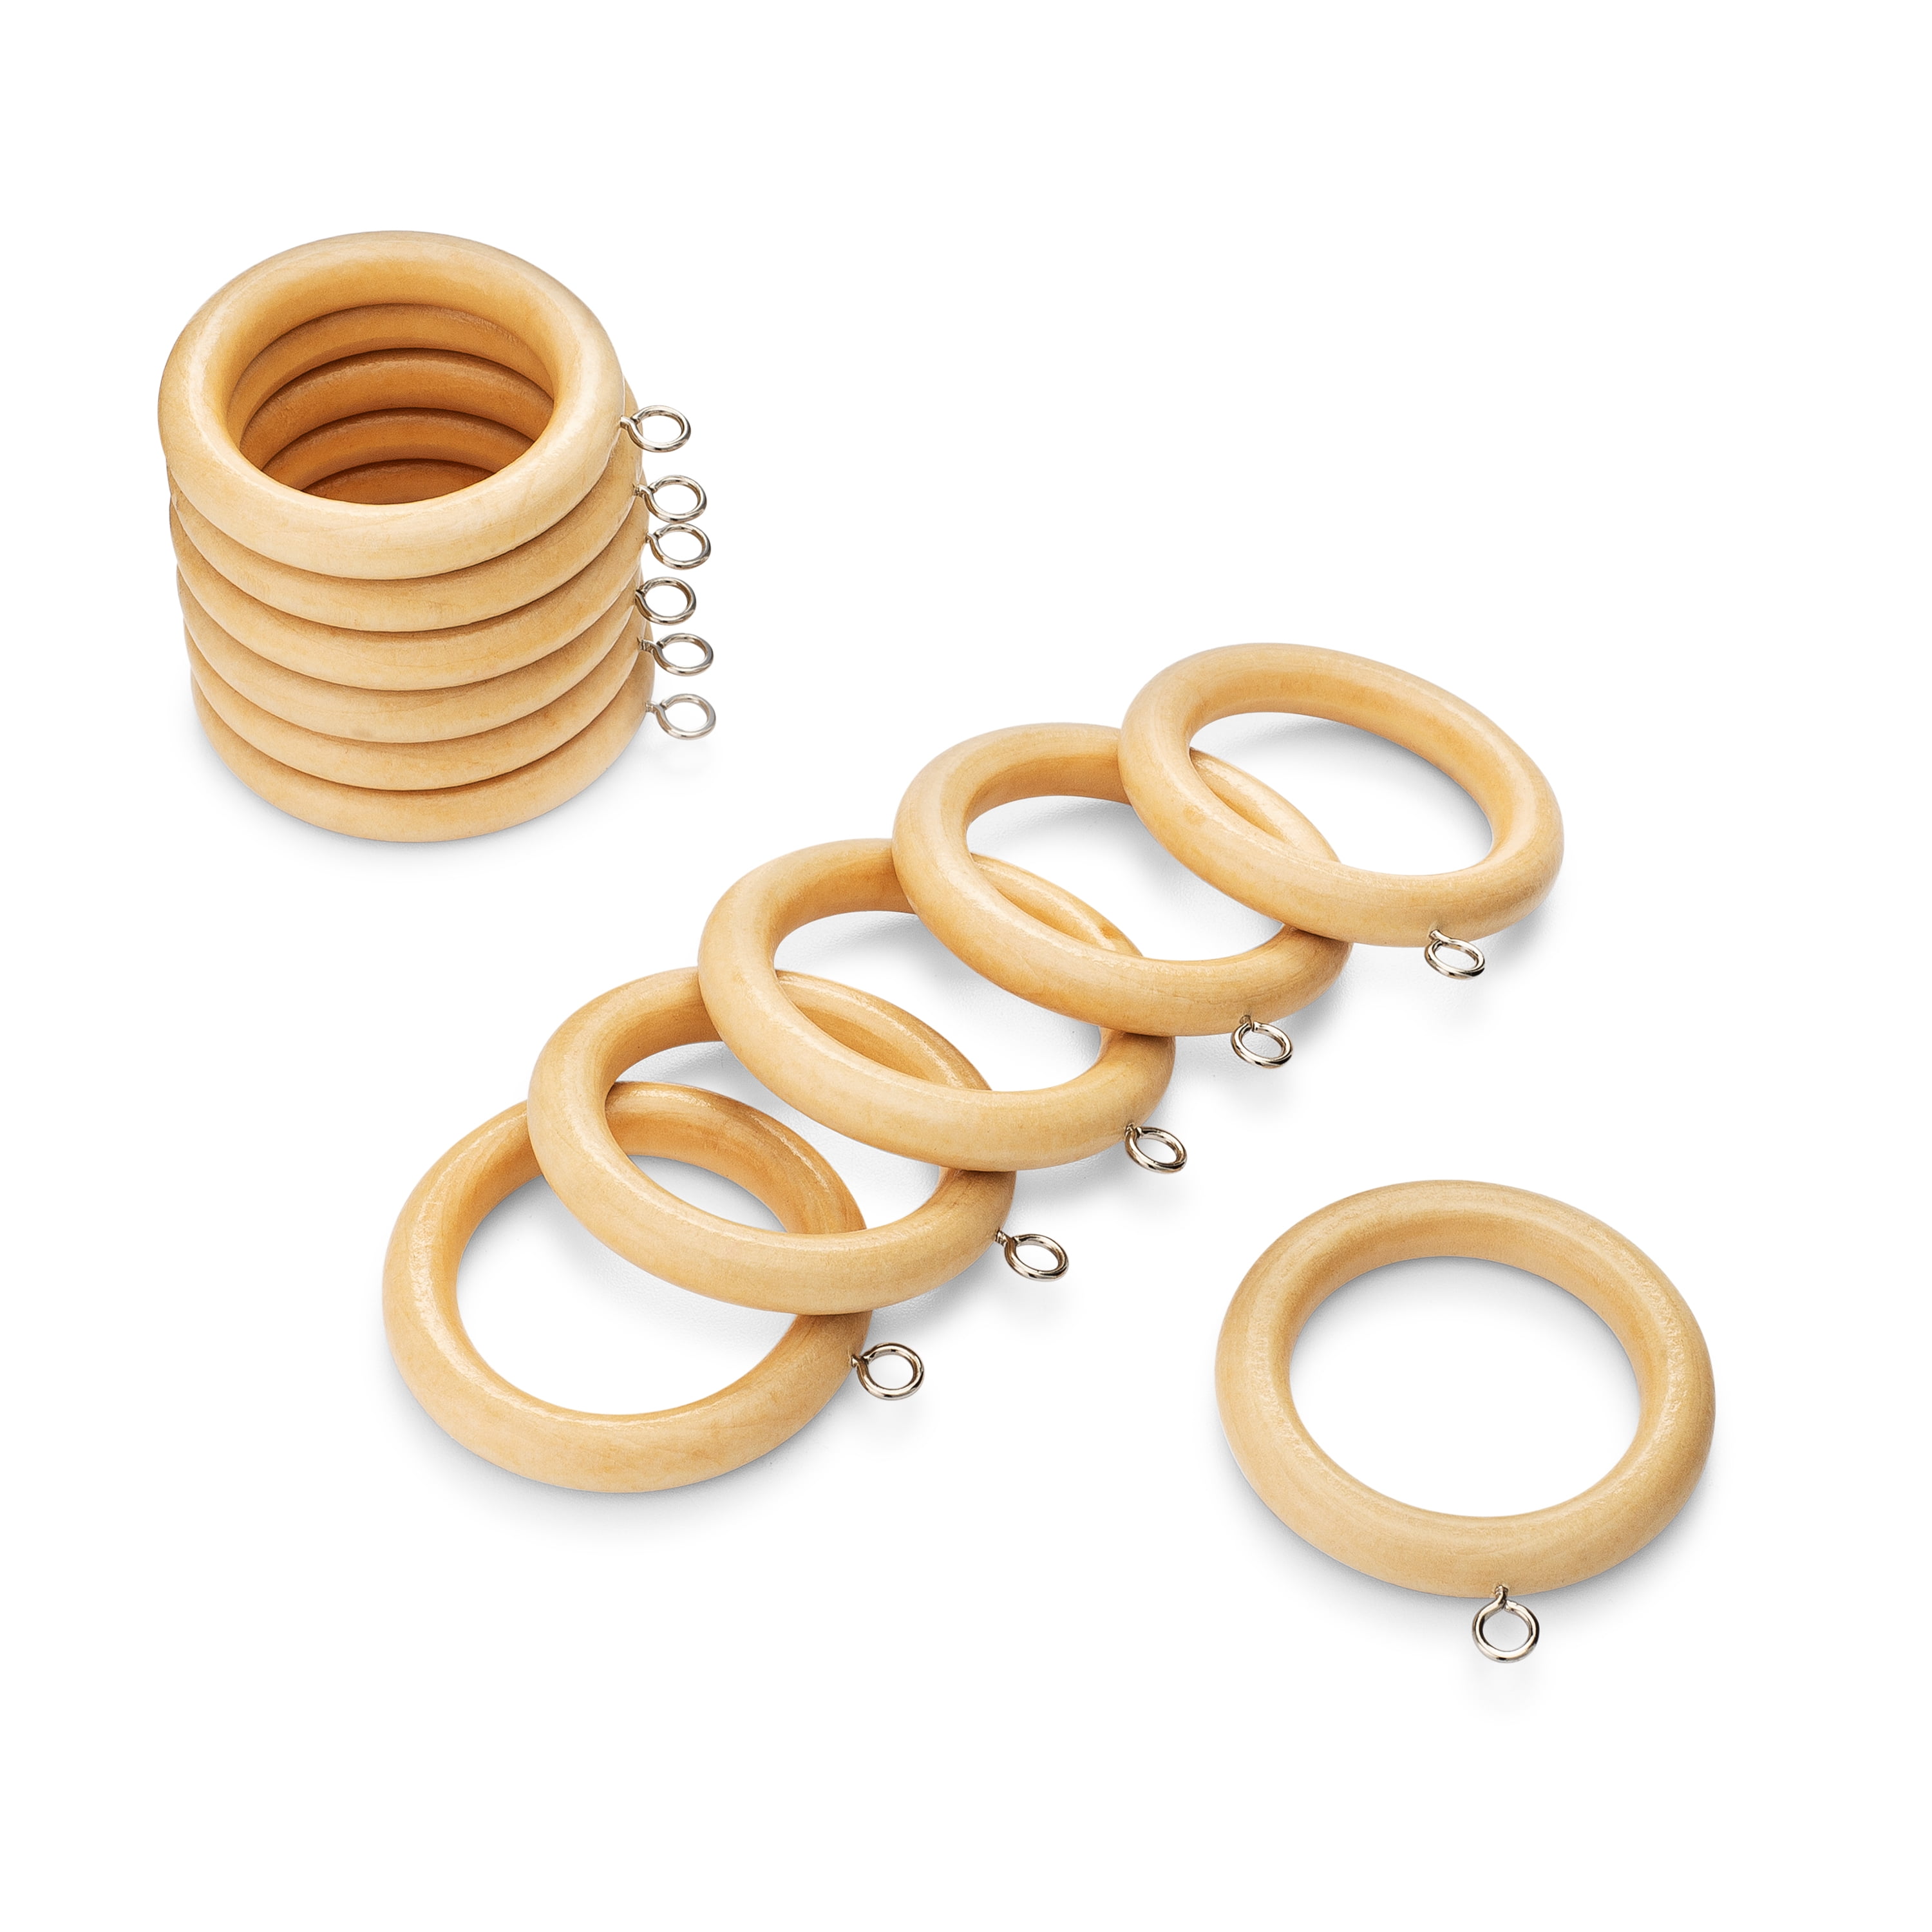 2 1/4 inch Wood Curtain Rings Unfinished, Set of 12, Size: 2.25, Beige